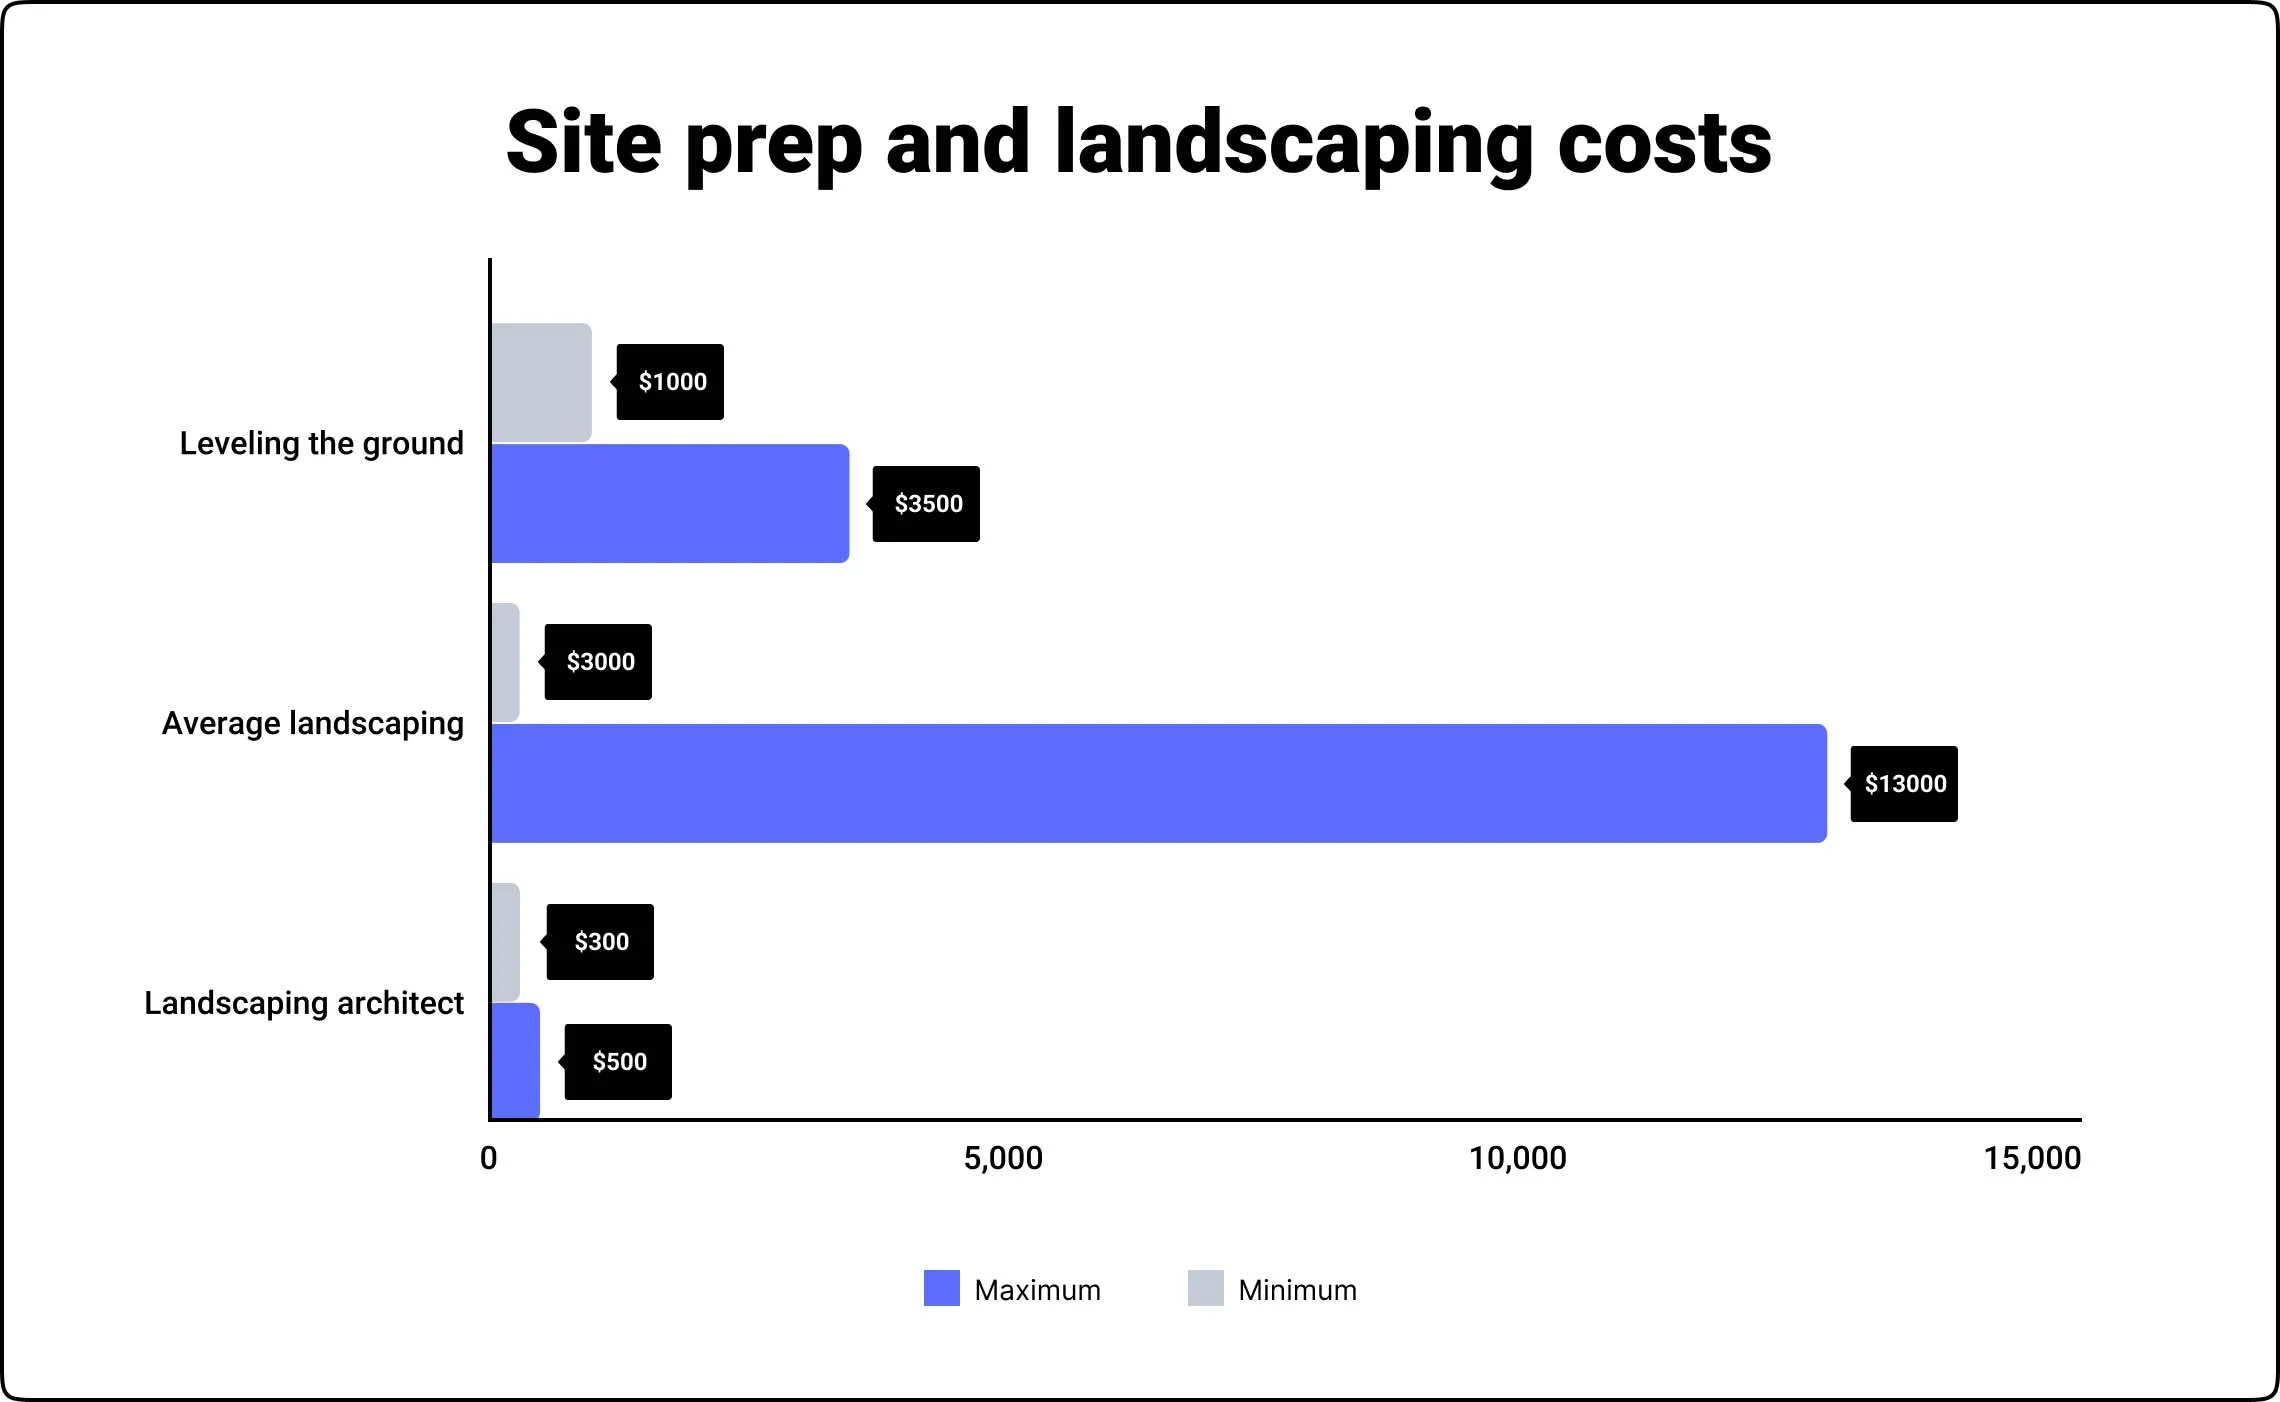 Site prep and landscaping costs